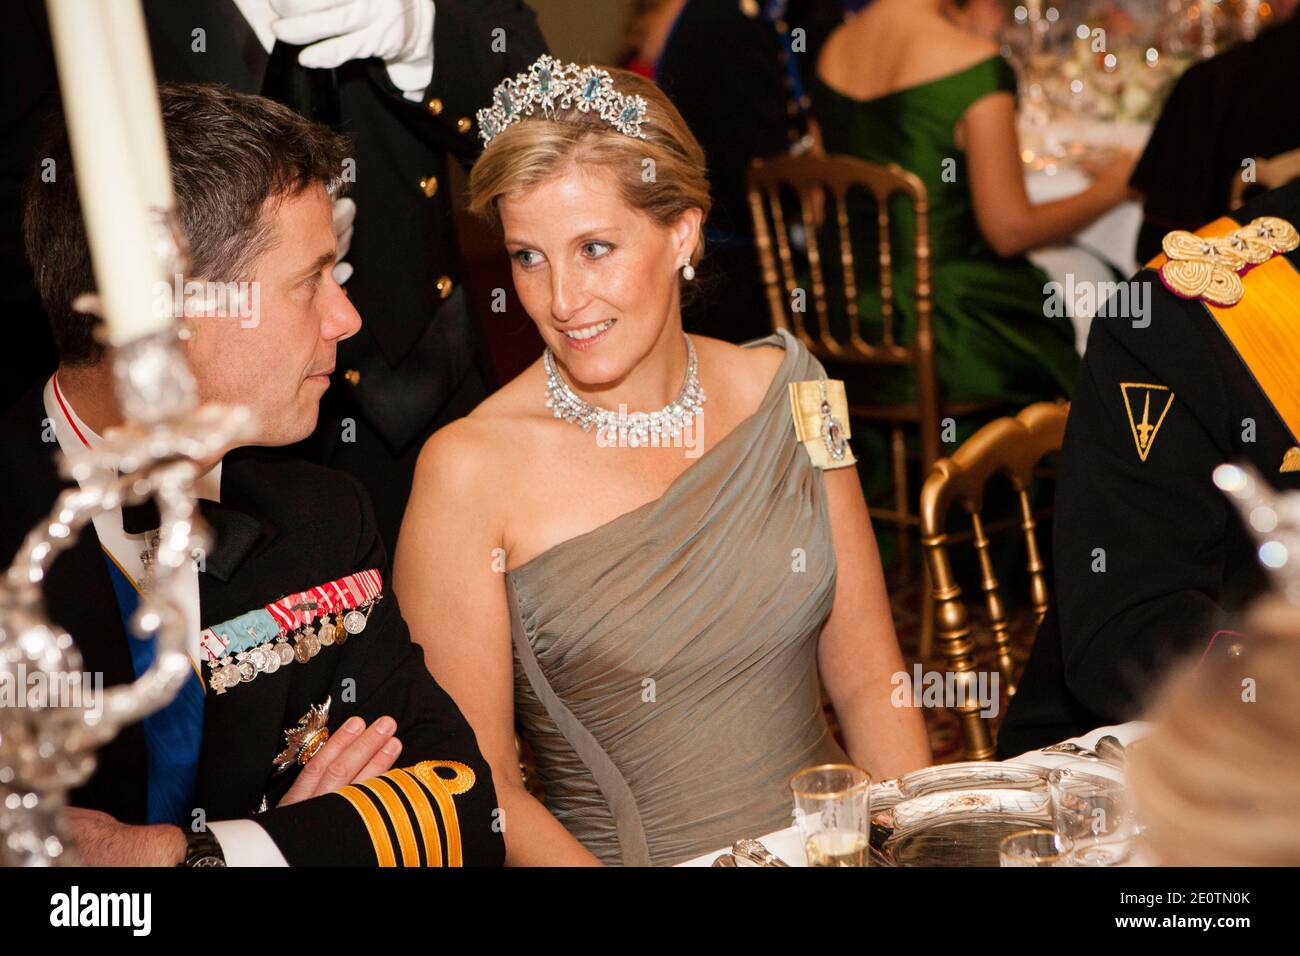 crown-prince-frederik-of-denmark-and-princess-sophie-of-wessex-are-pictured-a-gala-dinner-in-luxembourg-grand-ducal-palace-after-the-civil-wedding-of-hereditary-grand-duke-guillaume-of-luxembourg-and-belgian-countess-stephanie-de-lannoy-in-luxembourg-city-luxembourg-on-october-19-2012-the-30-year-old-hereditary-grand-duke-of-luxembourg-is-the-last-hereditary-prince-in-europe-to-get-married-marrying-his-28-year-old-belgian-countess-bride-photo-by-christian-aschmangrand-ducal-courtabacapresscom-2E0TN0K.jpg